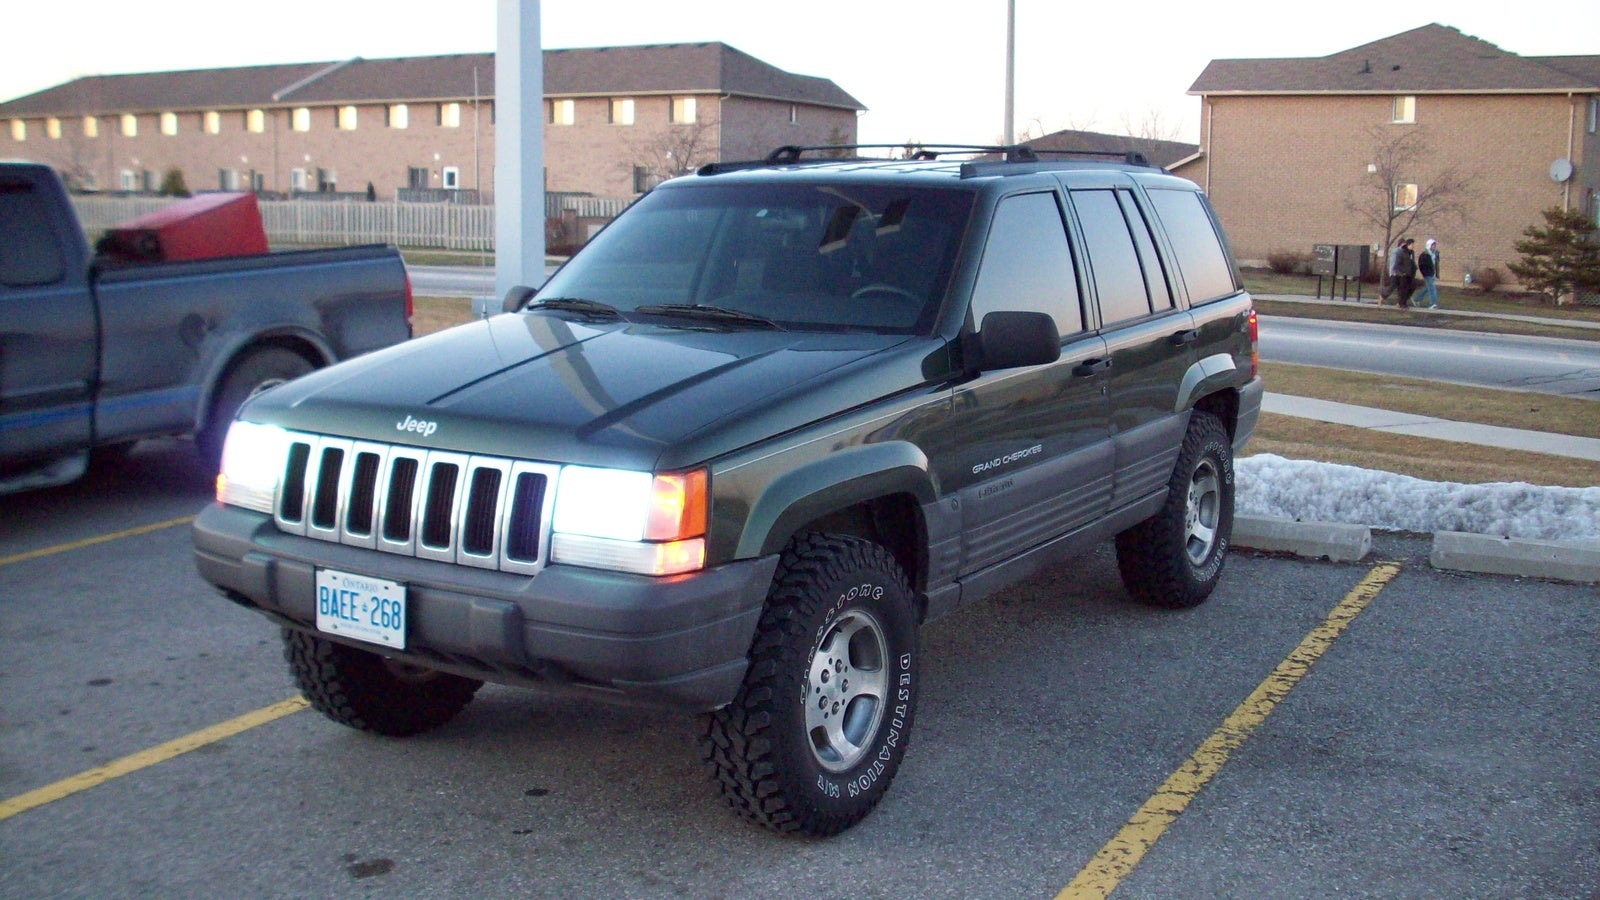 1996 Jeep grand cherokee limited owner manual #1